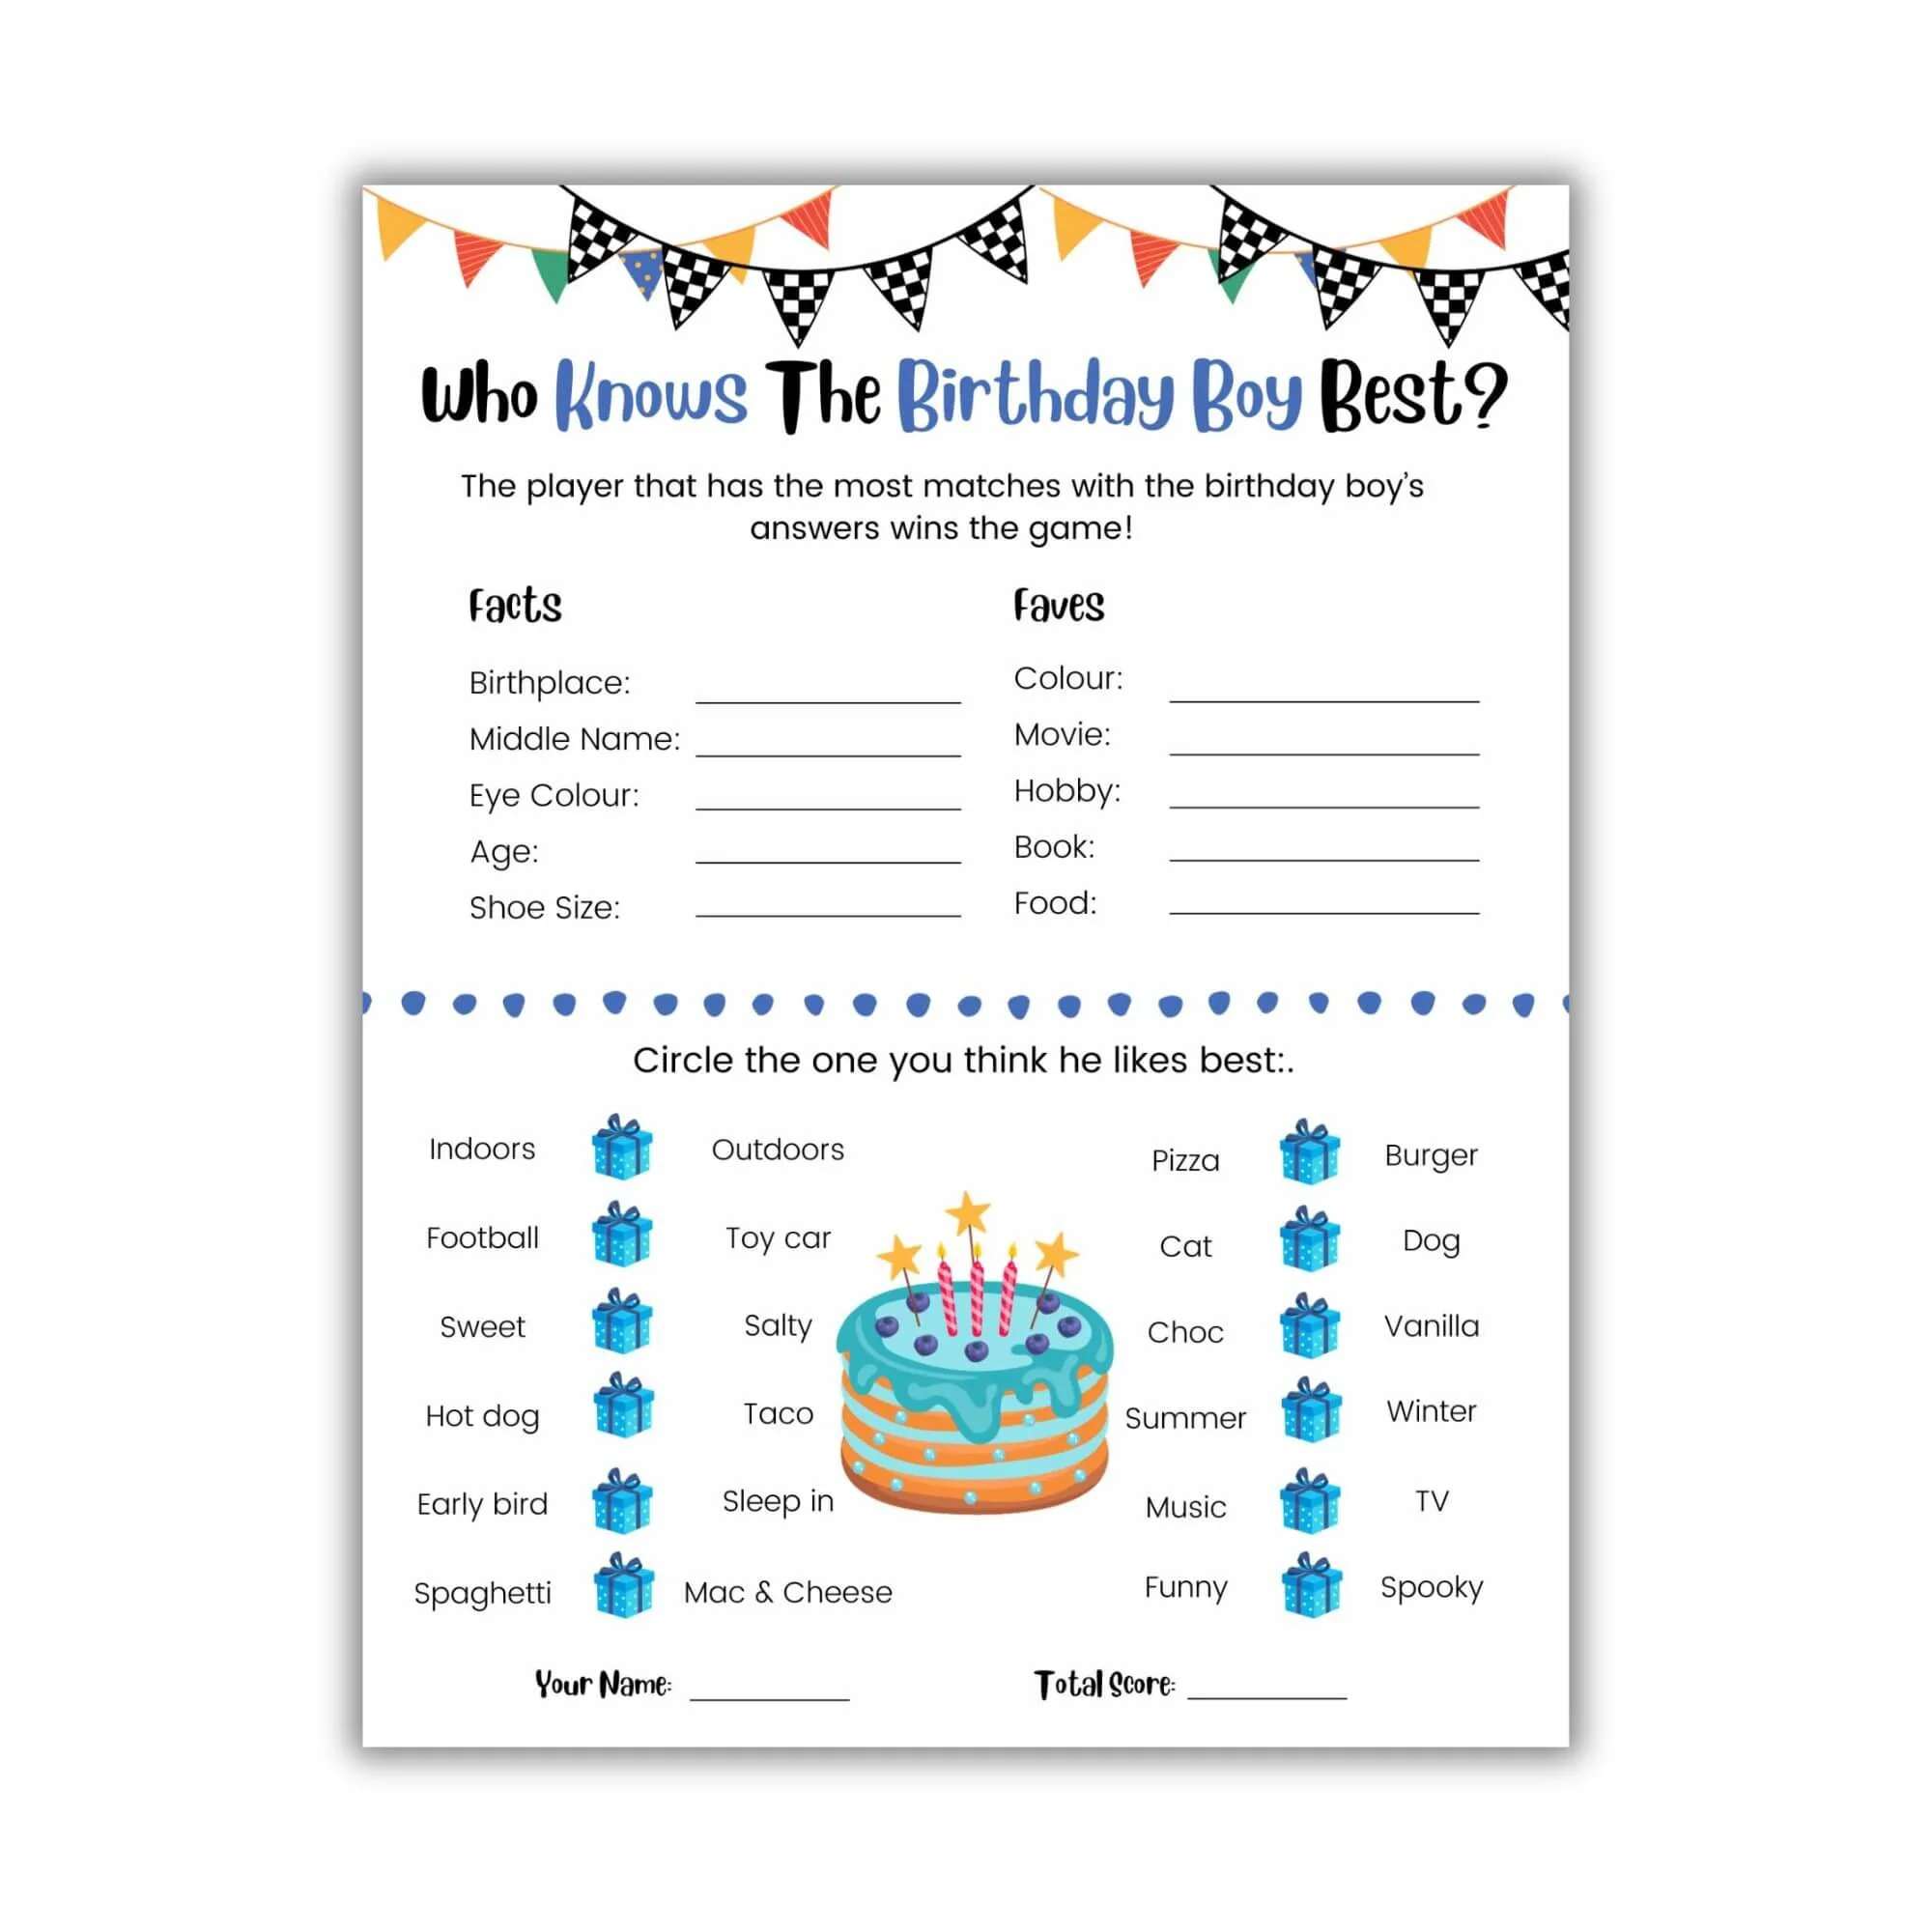 Who knows the birthday boy best printable game.